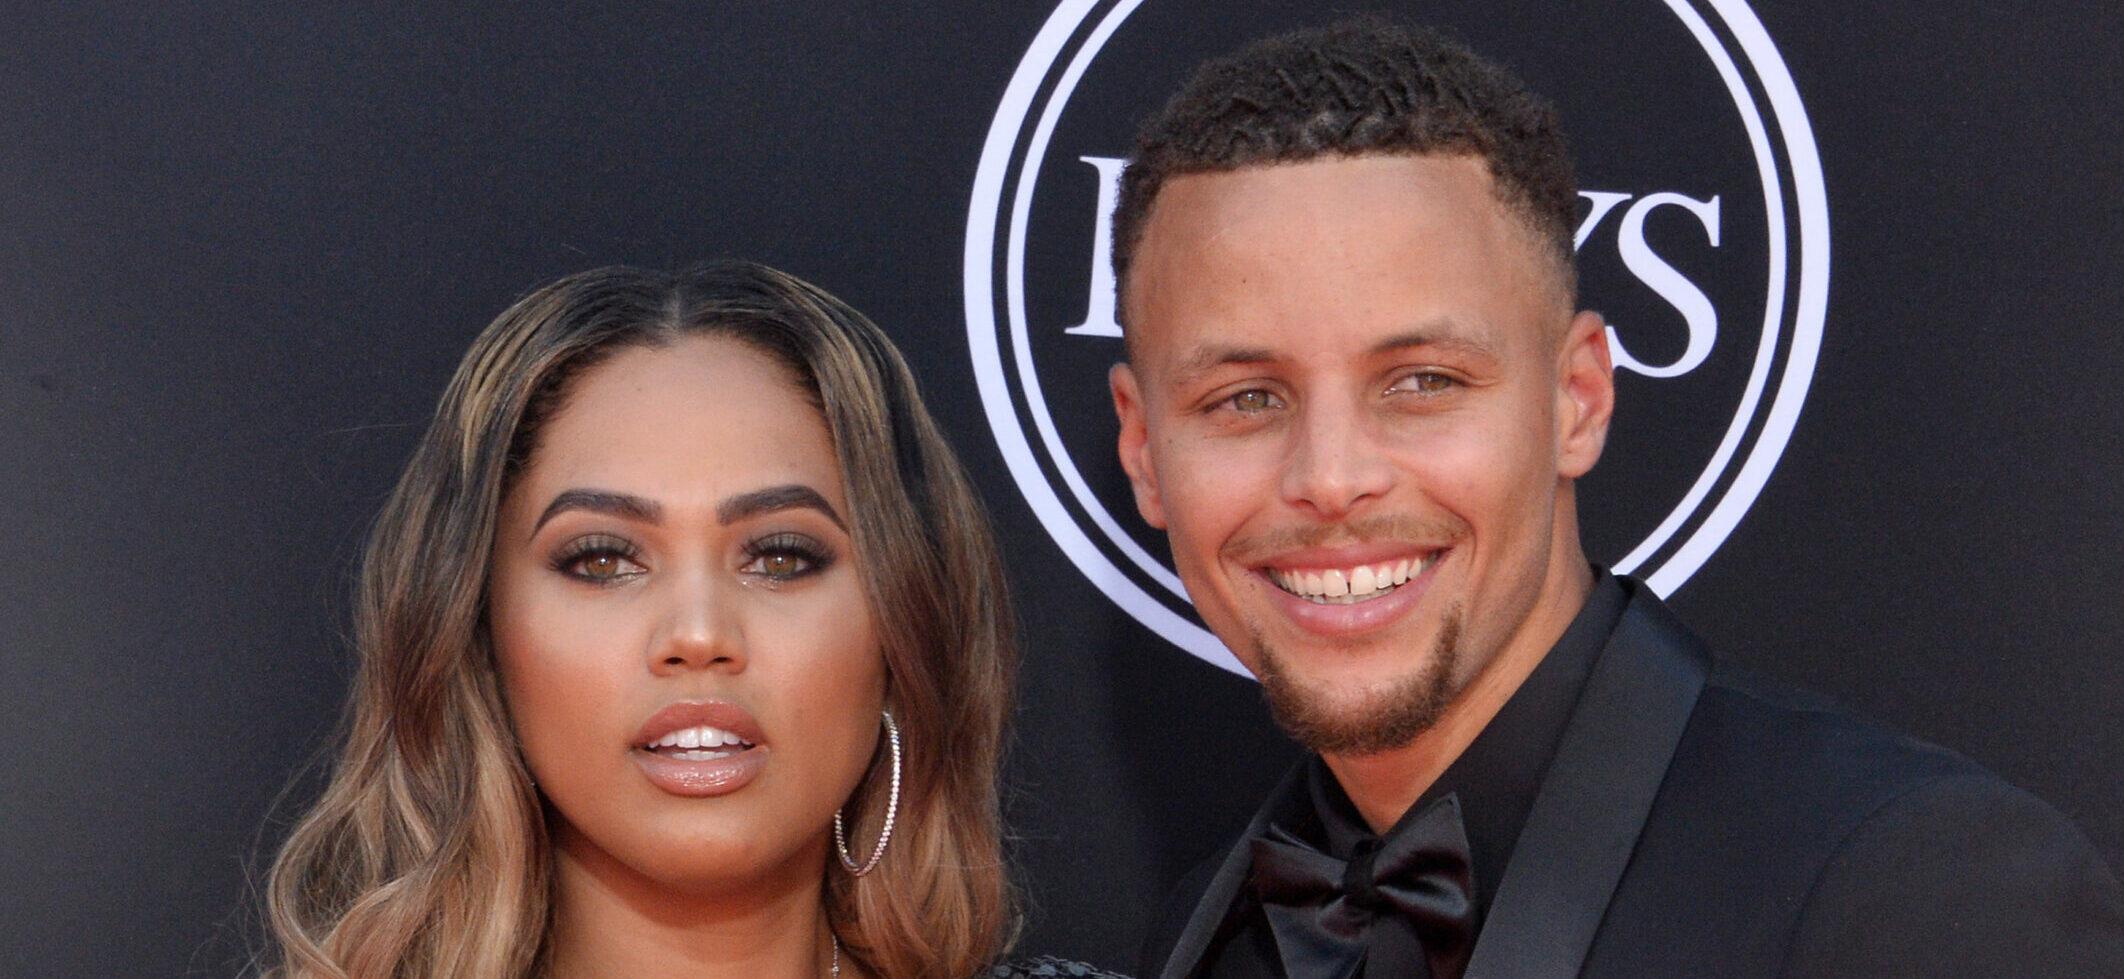 Steph Curry and Ayesha Curry at the 25th ESPYS in Los Angeles